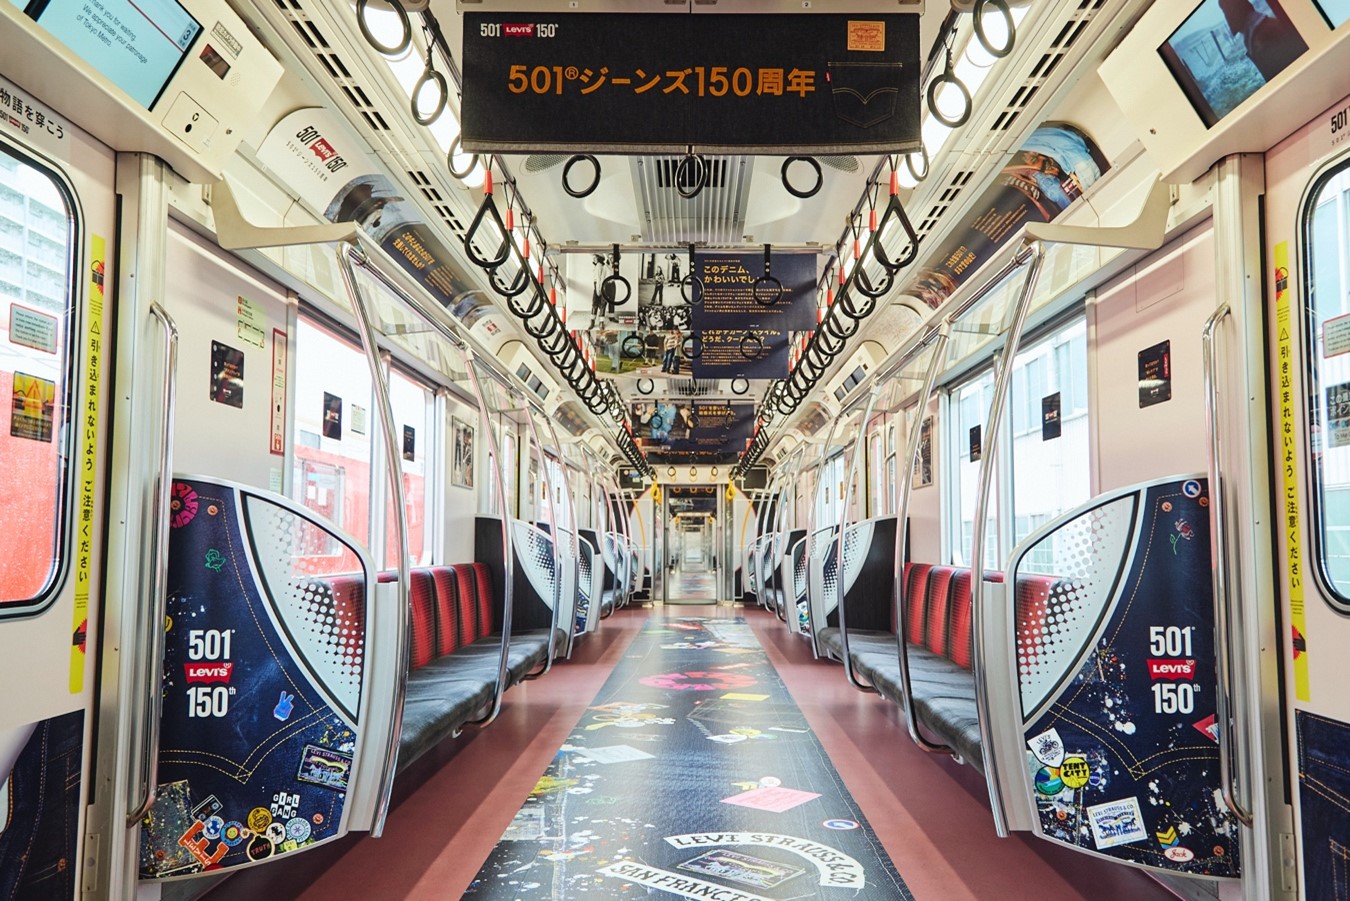 kulstof Virus Mutton Levi's jacks up the Ginza and Marunouchi Lines! Special trains are running  for a limited time to celebrate the 150th anniversary of the 501! | Men's  Fashion Media OTOKOMAE